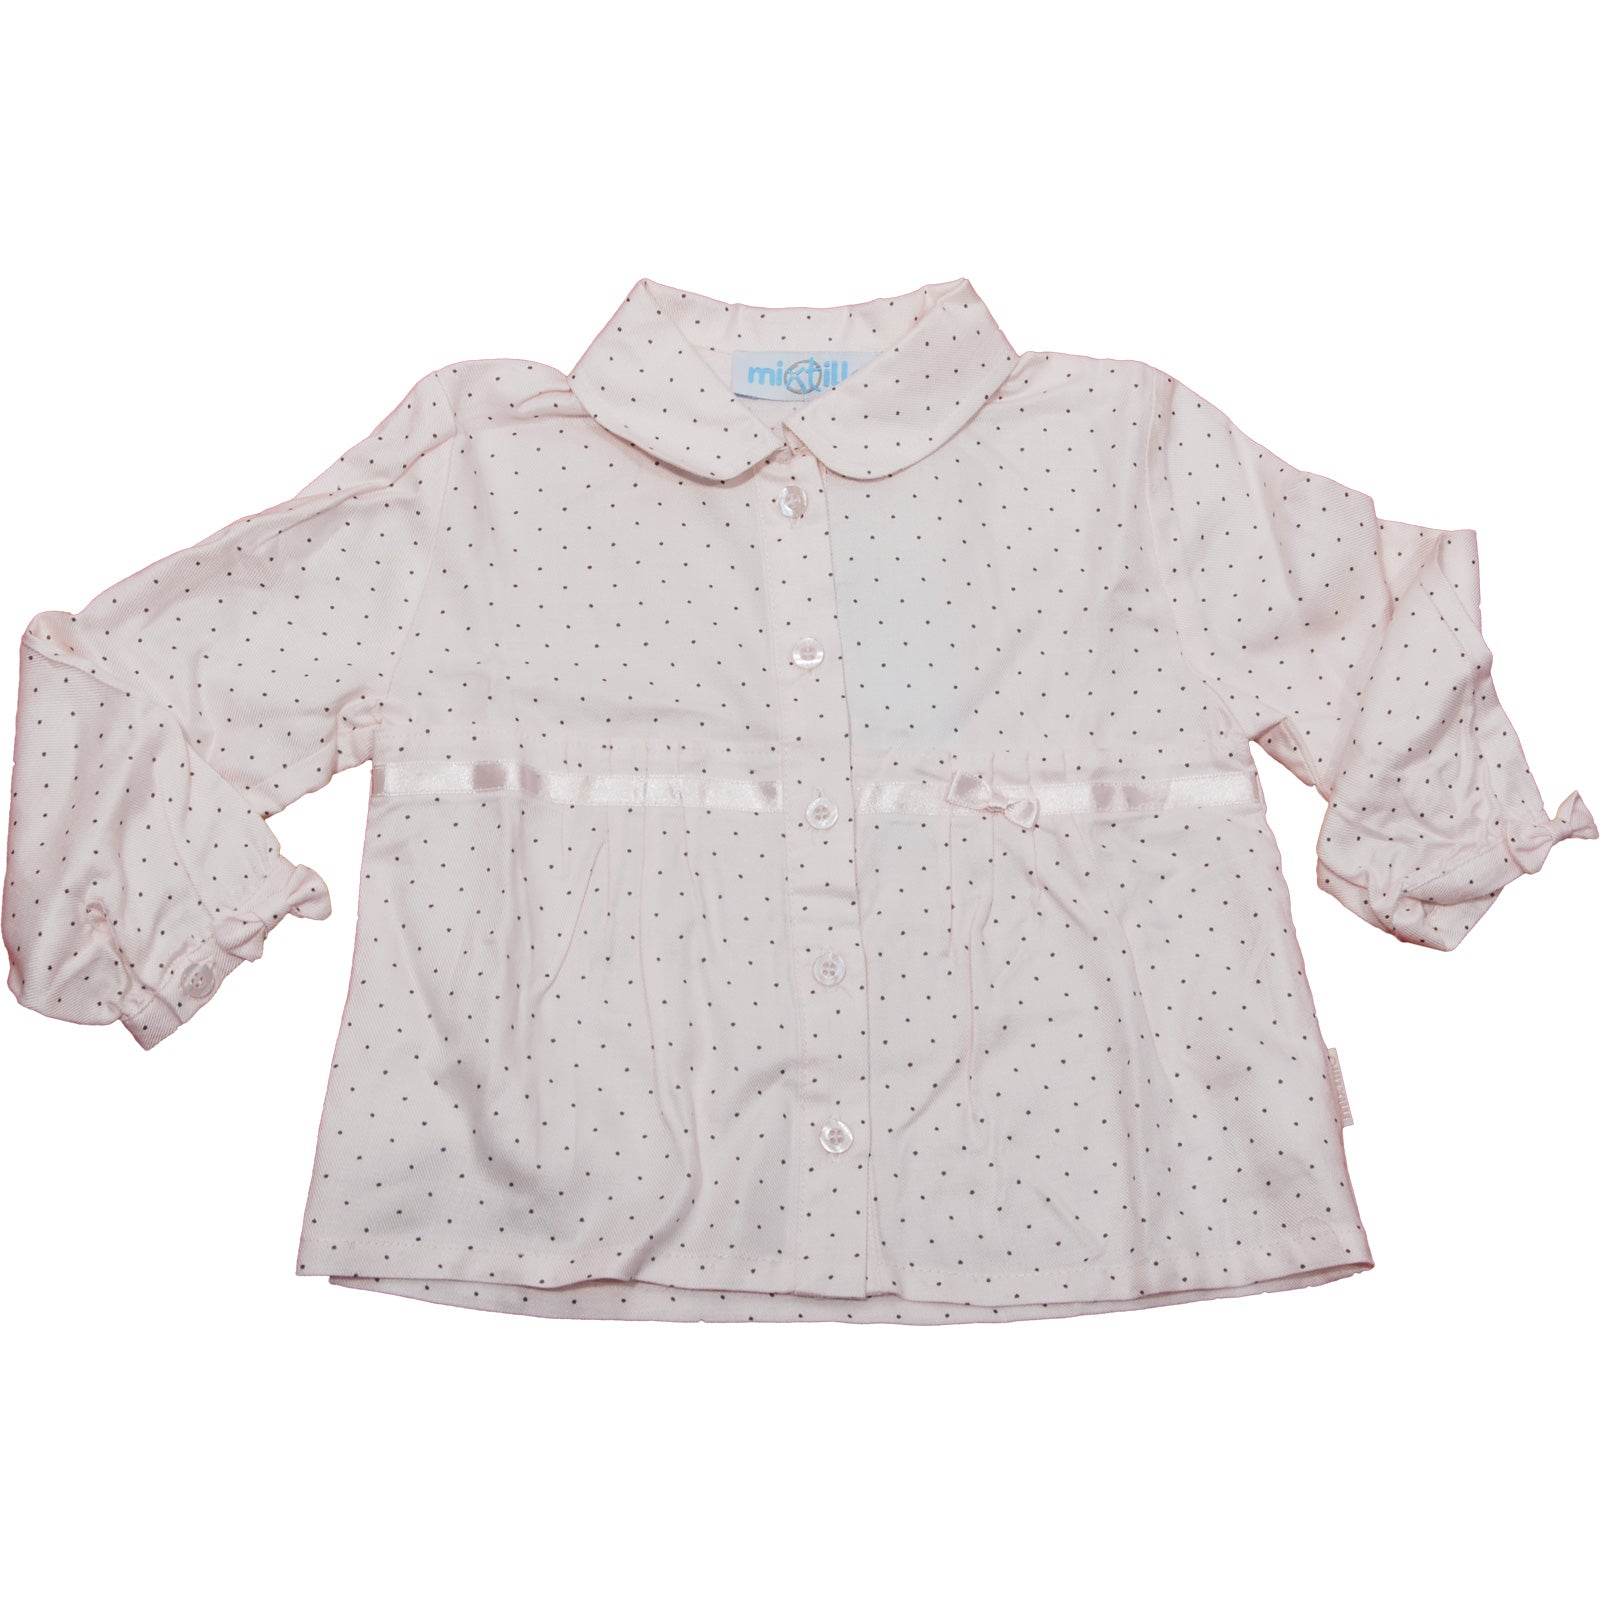 
  Shirt from the girl's clothing line Blueberry patterned micropois, with satin bow and crimp. 
...